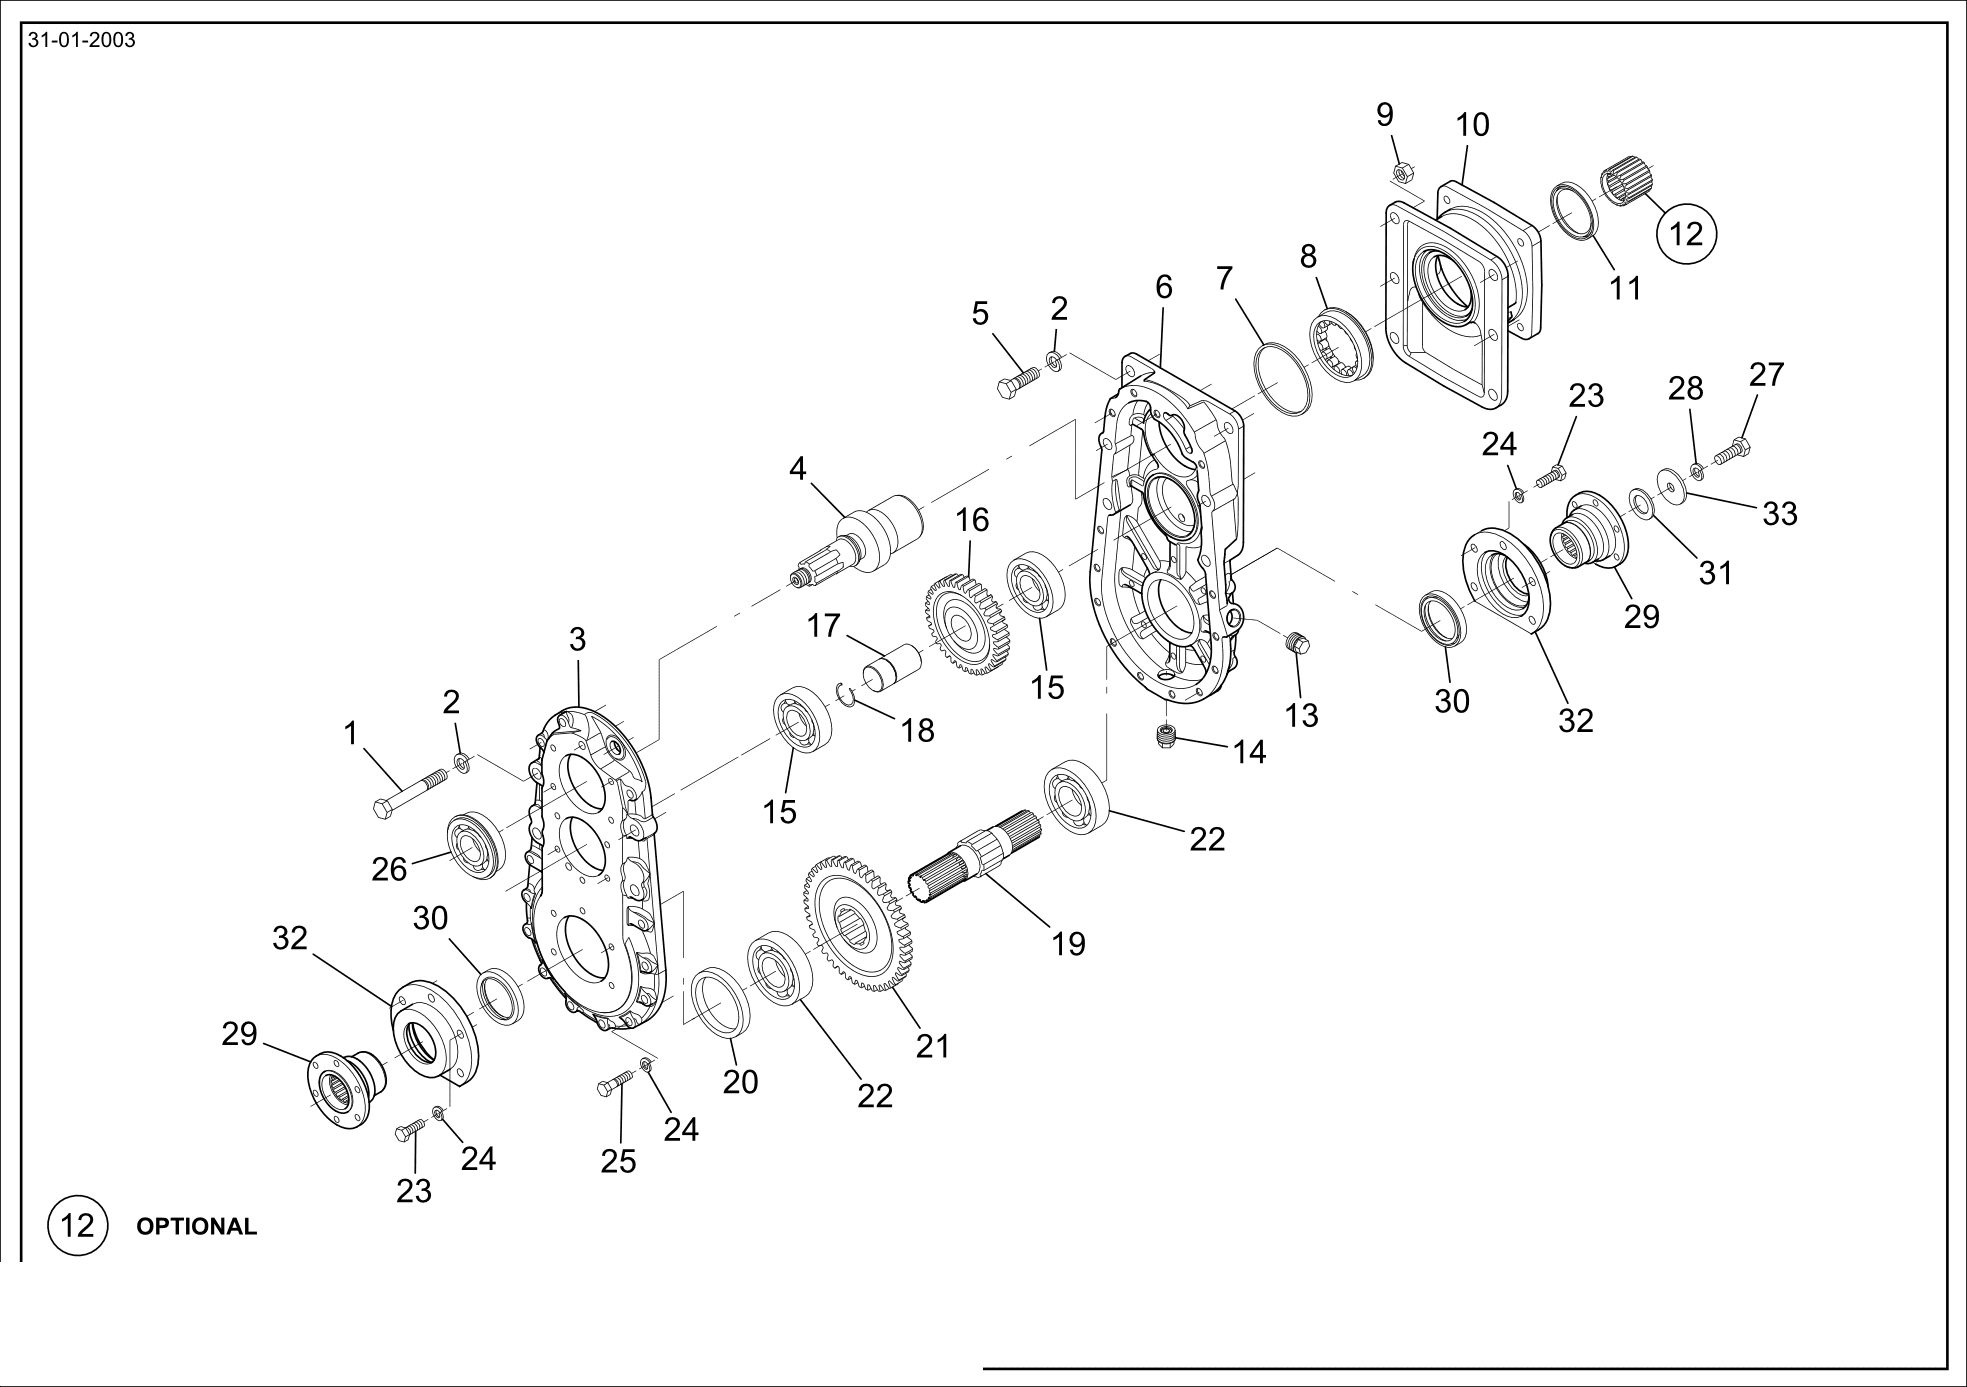 drawing for CNH NEW HOLLAND 105532A1 - PIN (figure 1)